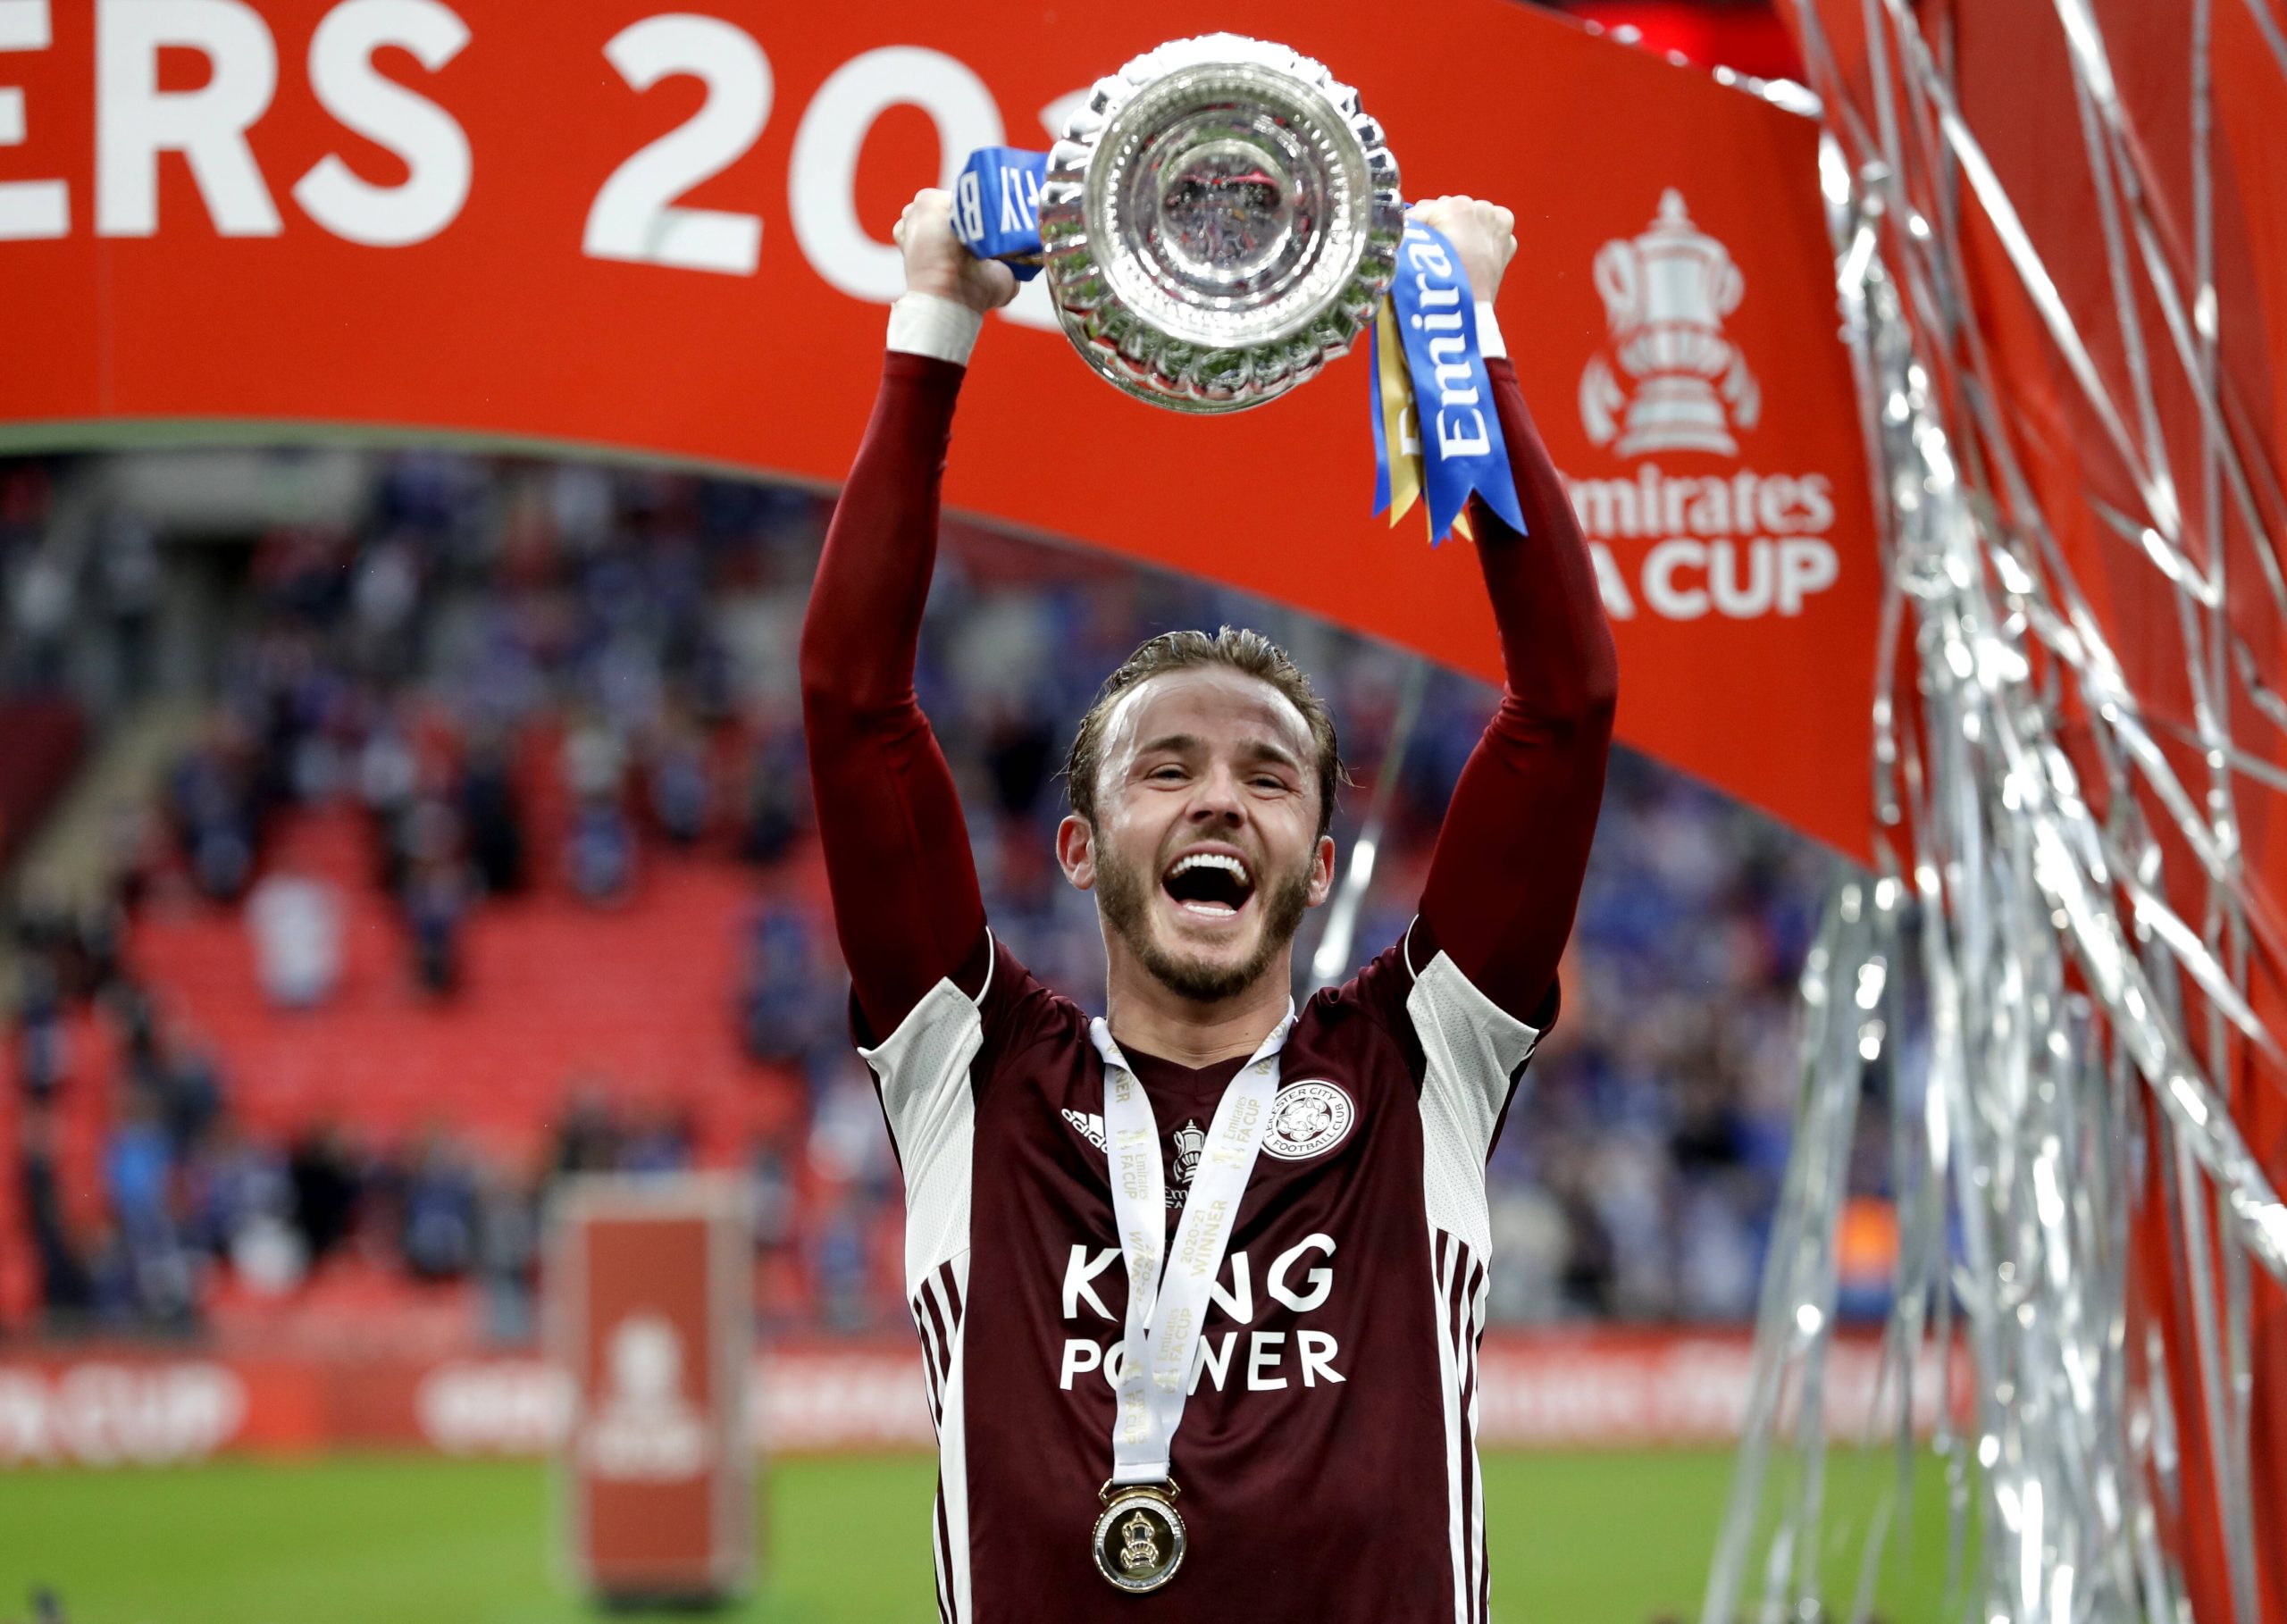 Chelsea v Leicester City – Emirates FA Cup Final – Wembley Stadium Leicester City s James Maddison celebrates with the